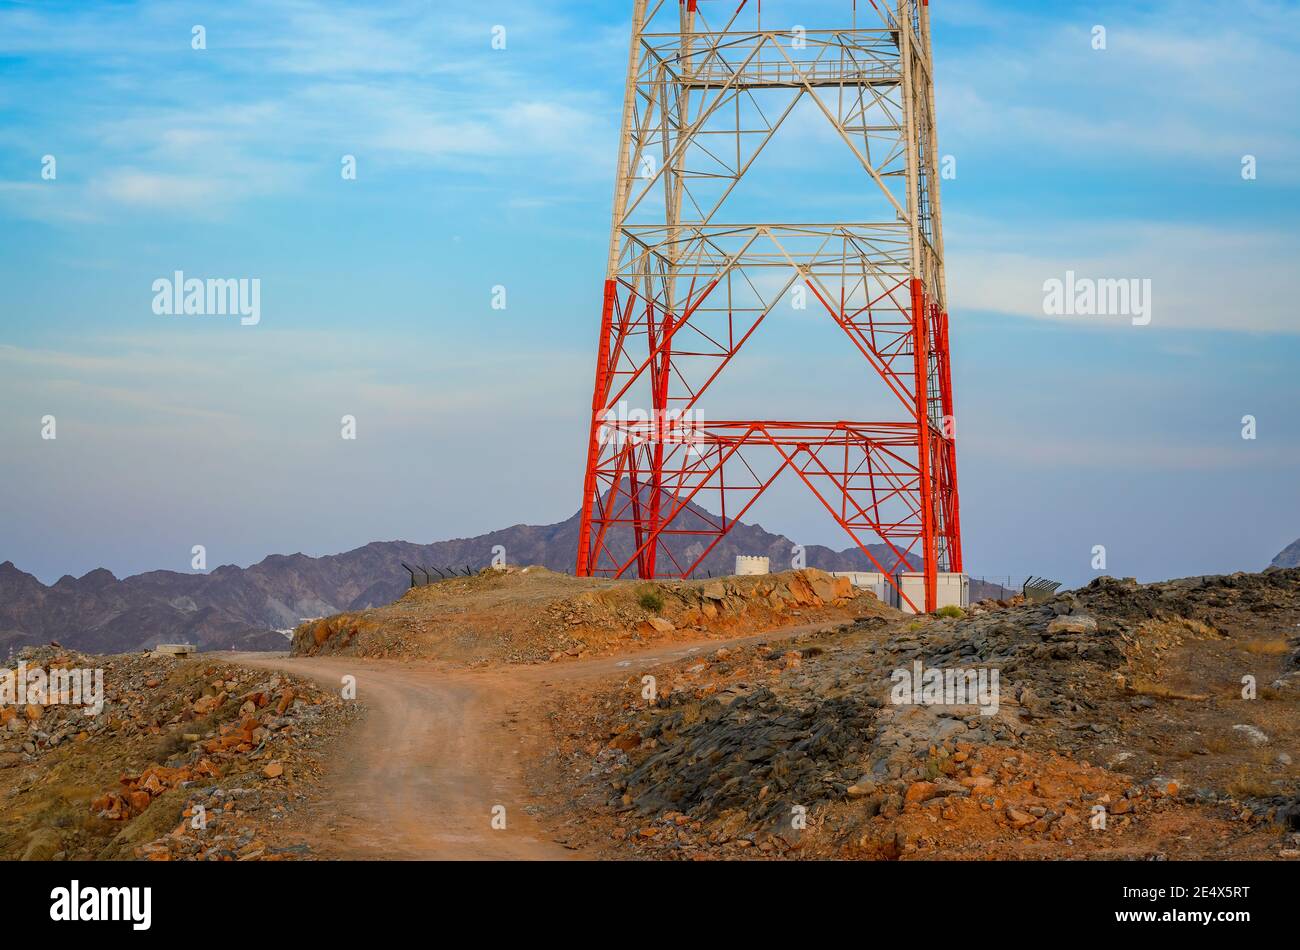 Dirt Road near a red & white Mobile Tower on a hilltop. From Muscat, Oman. Stock Photo